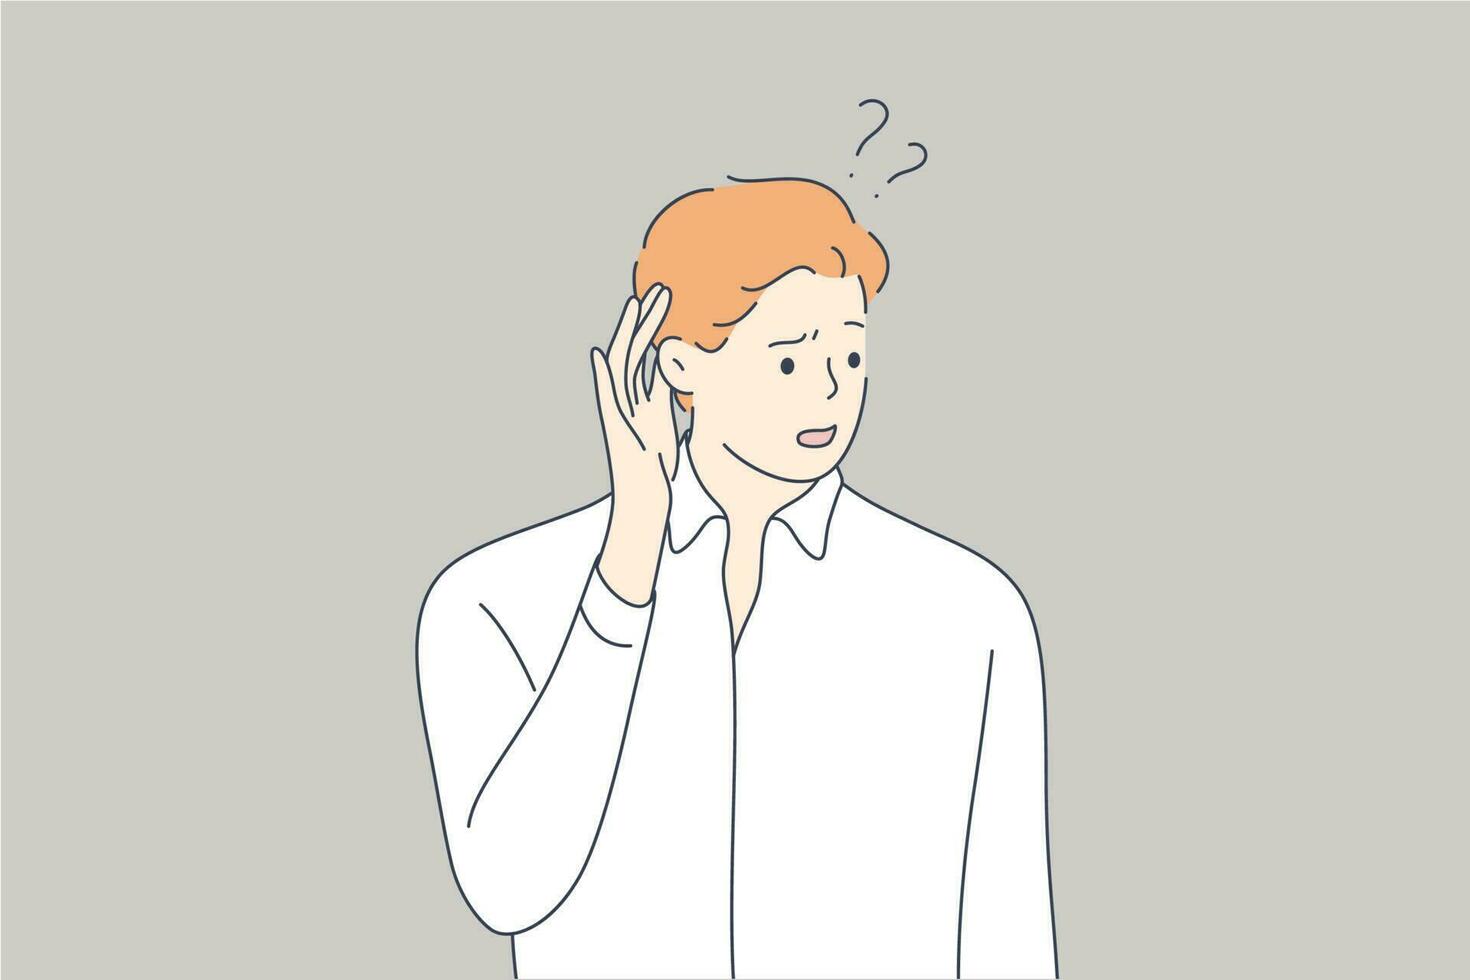 Emotion, face, expression, rumor, desease, health, care concept. Young deaf serious focused man guy teenager character standing with hand over ear listening or hearing to gossip. Deafness illustration vector